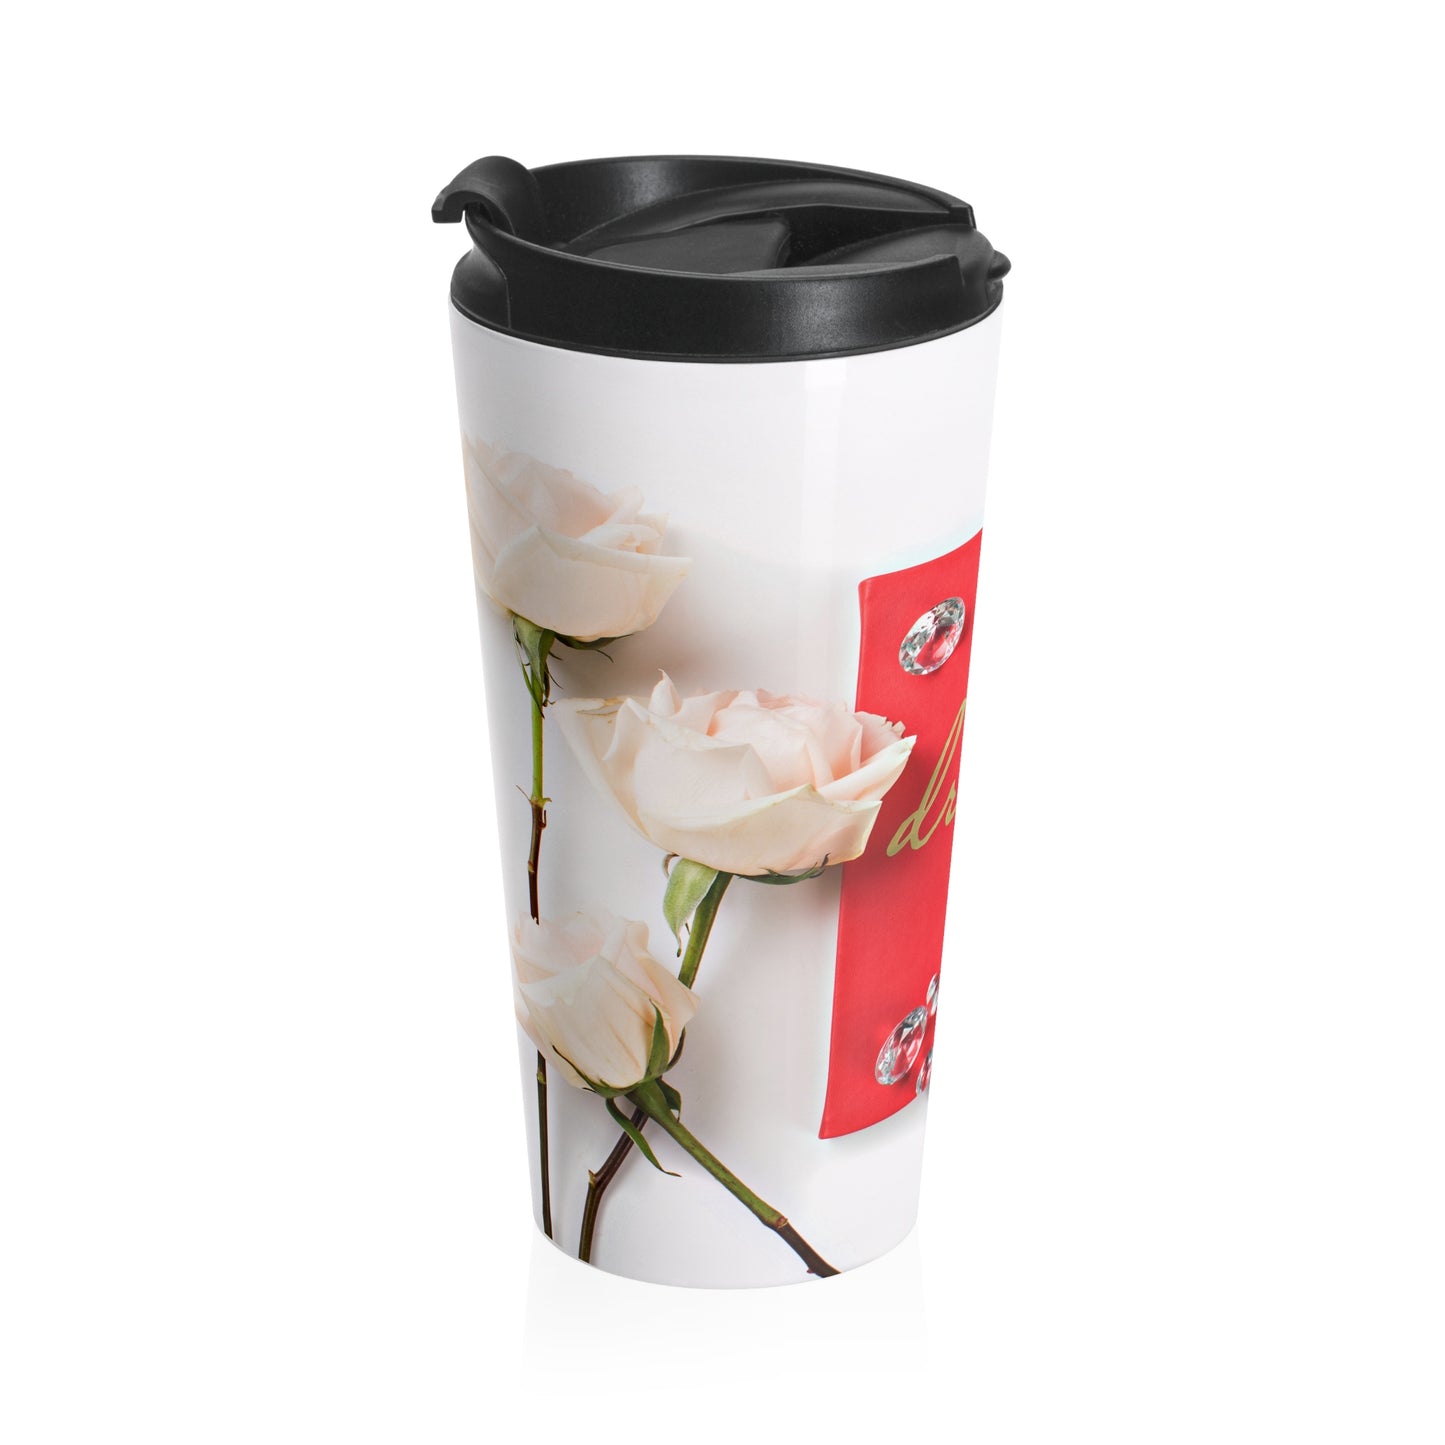 Stainless Steel Travel Mug (Diamonds Red Butterfly)